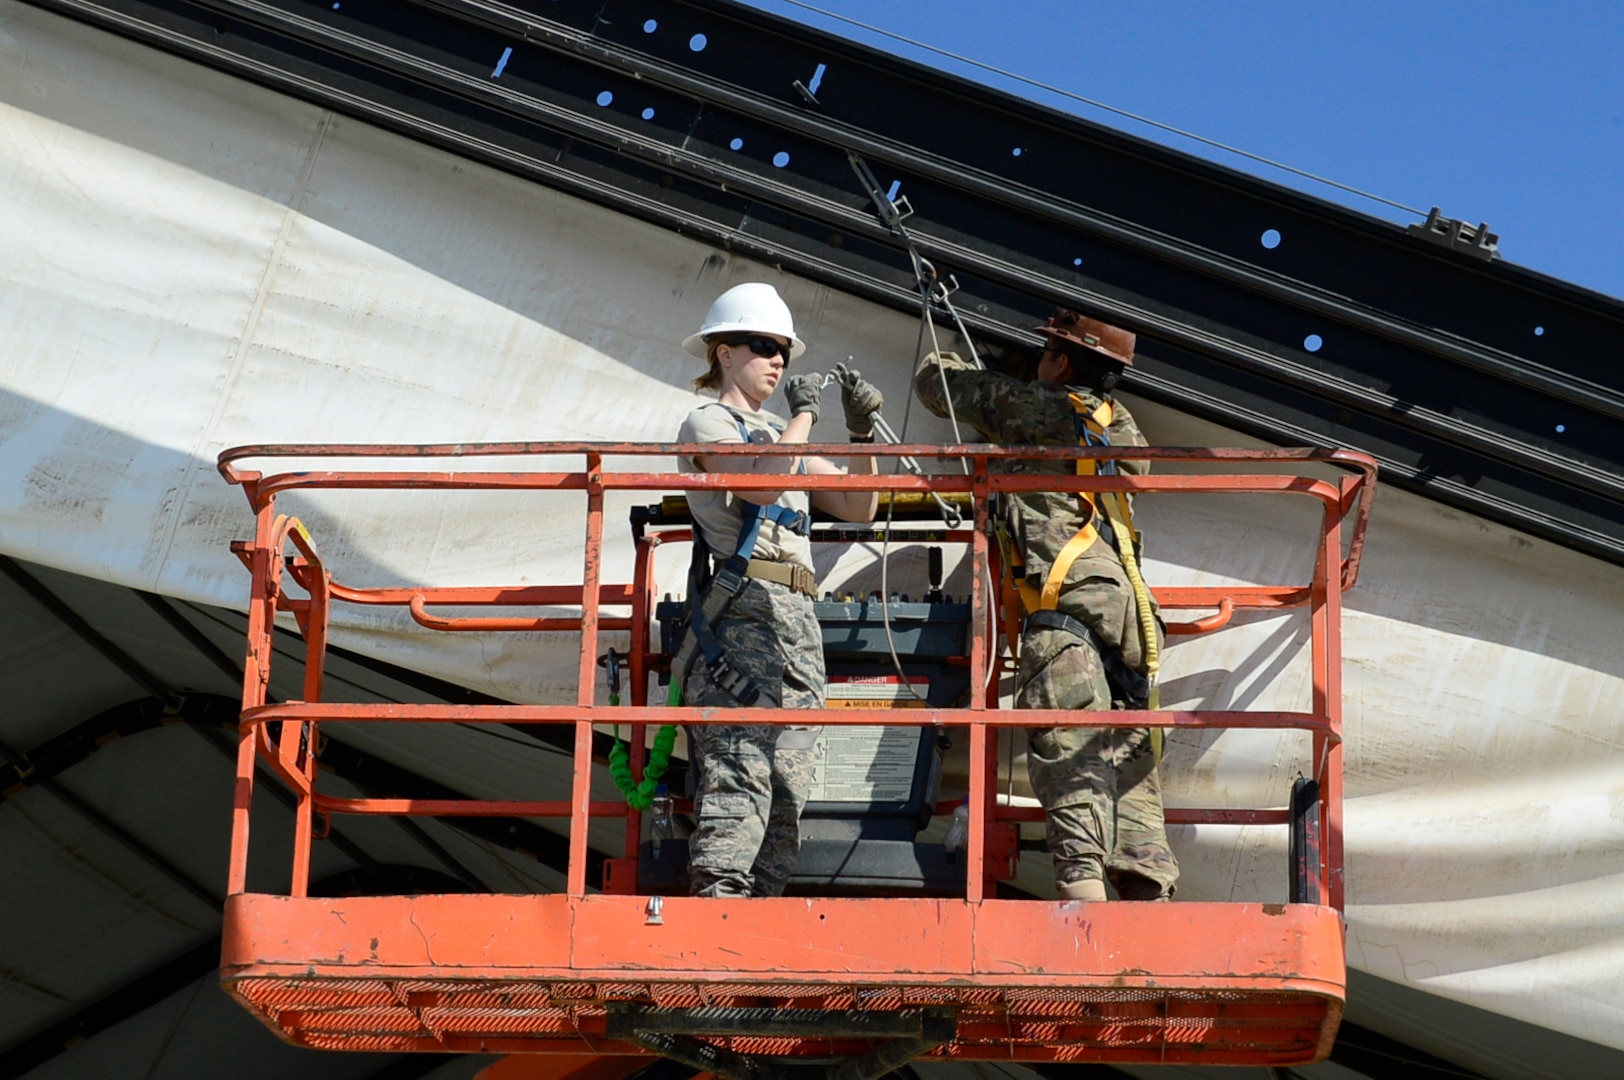 U.S. Air Force Capt. Silvey Hollenback, 386th Expeditionary Civil Engineer Squadron chief of operations engineering, center, and Senior Airman Steven Medina, 557th Expeditionary Prime BEEF Squadron electrician, right, deconstruct a large aircraft maintenance shelter at an undisclosed location in Southwest Asia, Feb. 8, 2017. The LAMS was being torn down in order to make room for the 386th Air Expeditionary Wing to house a fleet of MQ-9 Reapers. (U.S. Air Force photo by Capt. Casey Osborne)